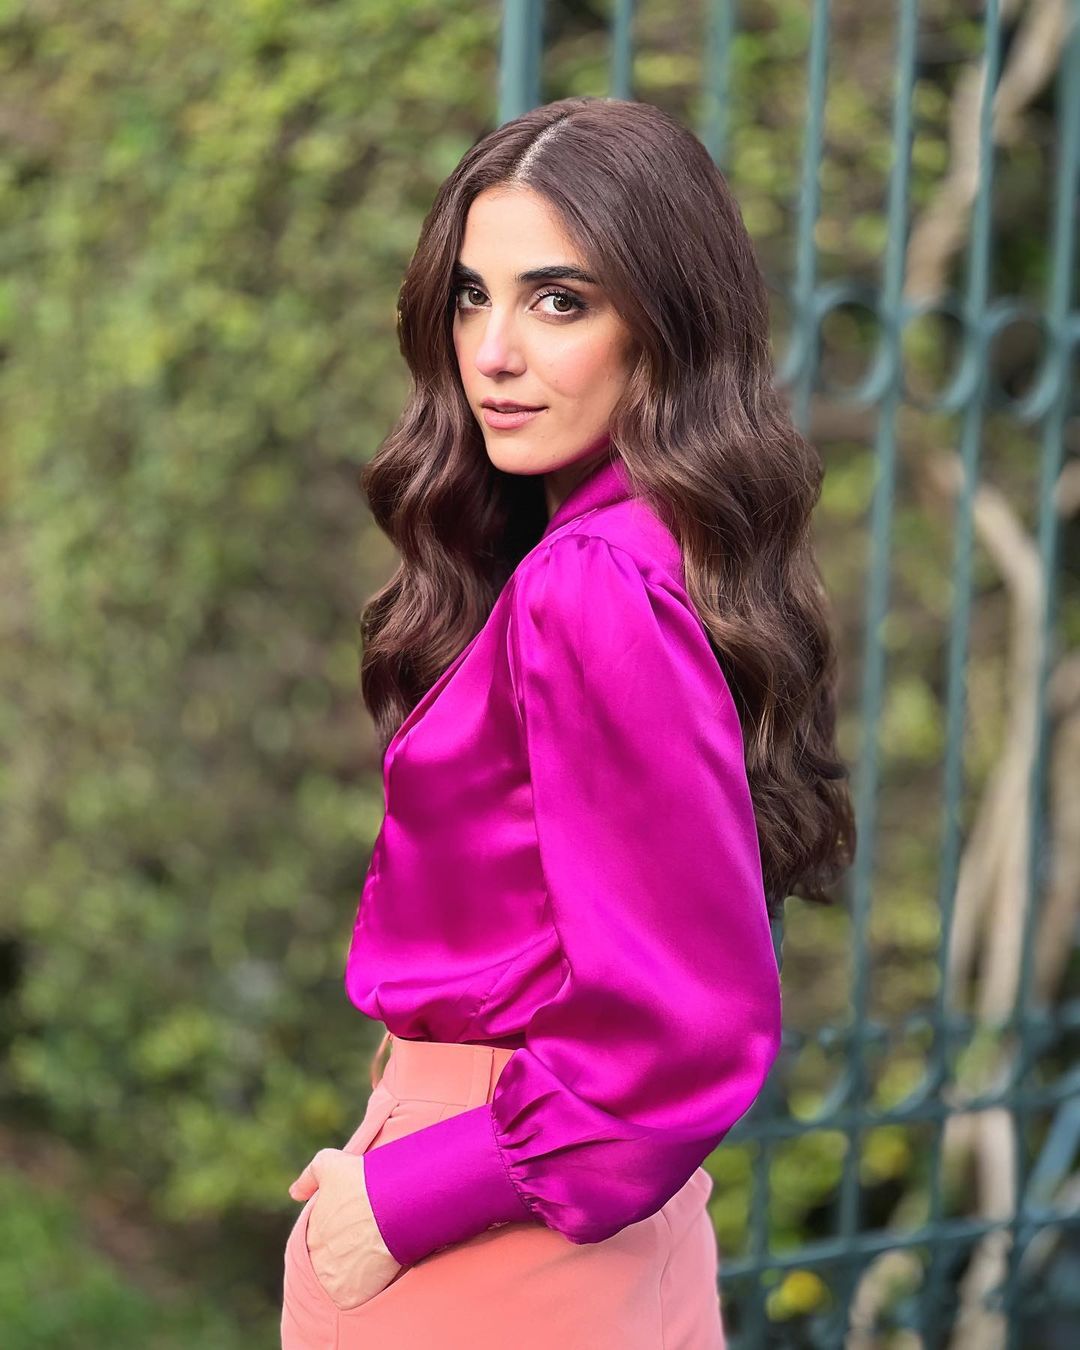 Maya Ali is a Captivating Vision in Pink and Purple - Lens